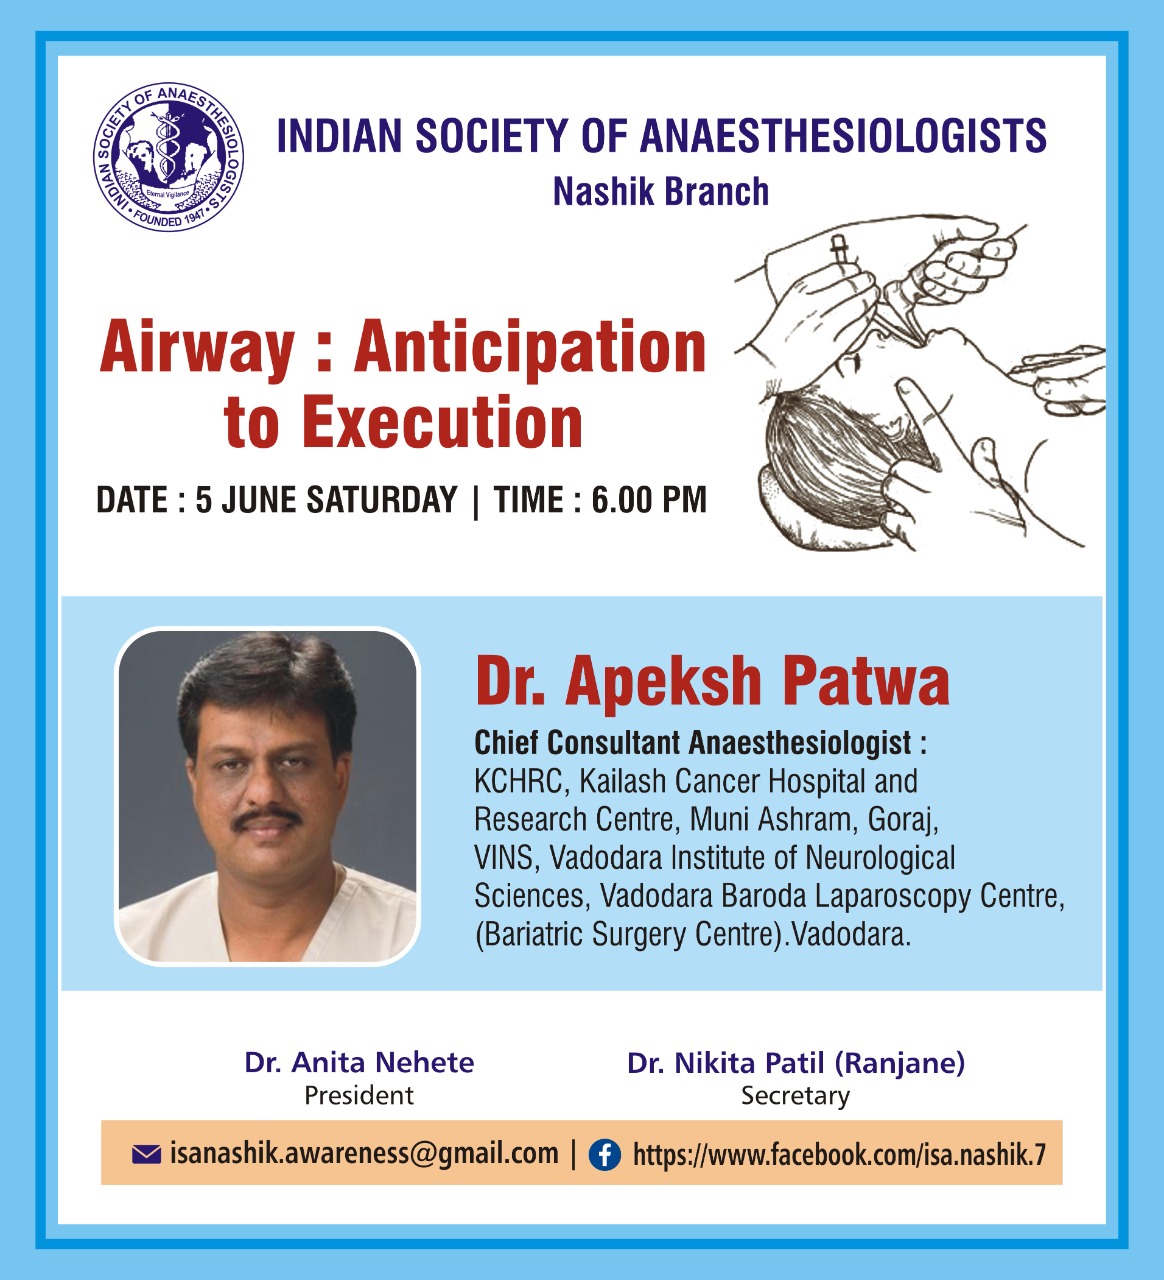 “AIRWAY : Anticipation to Execution” by Dr. Apeksh Patwa